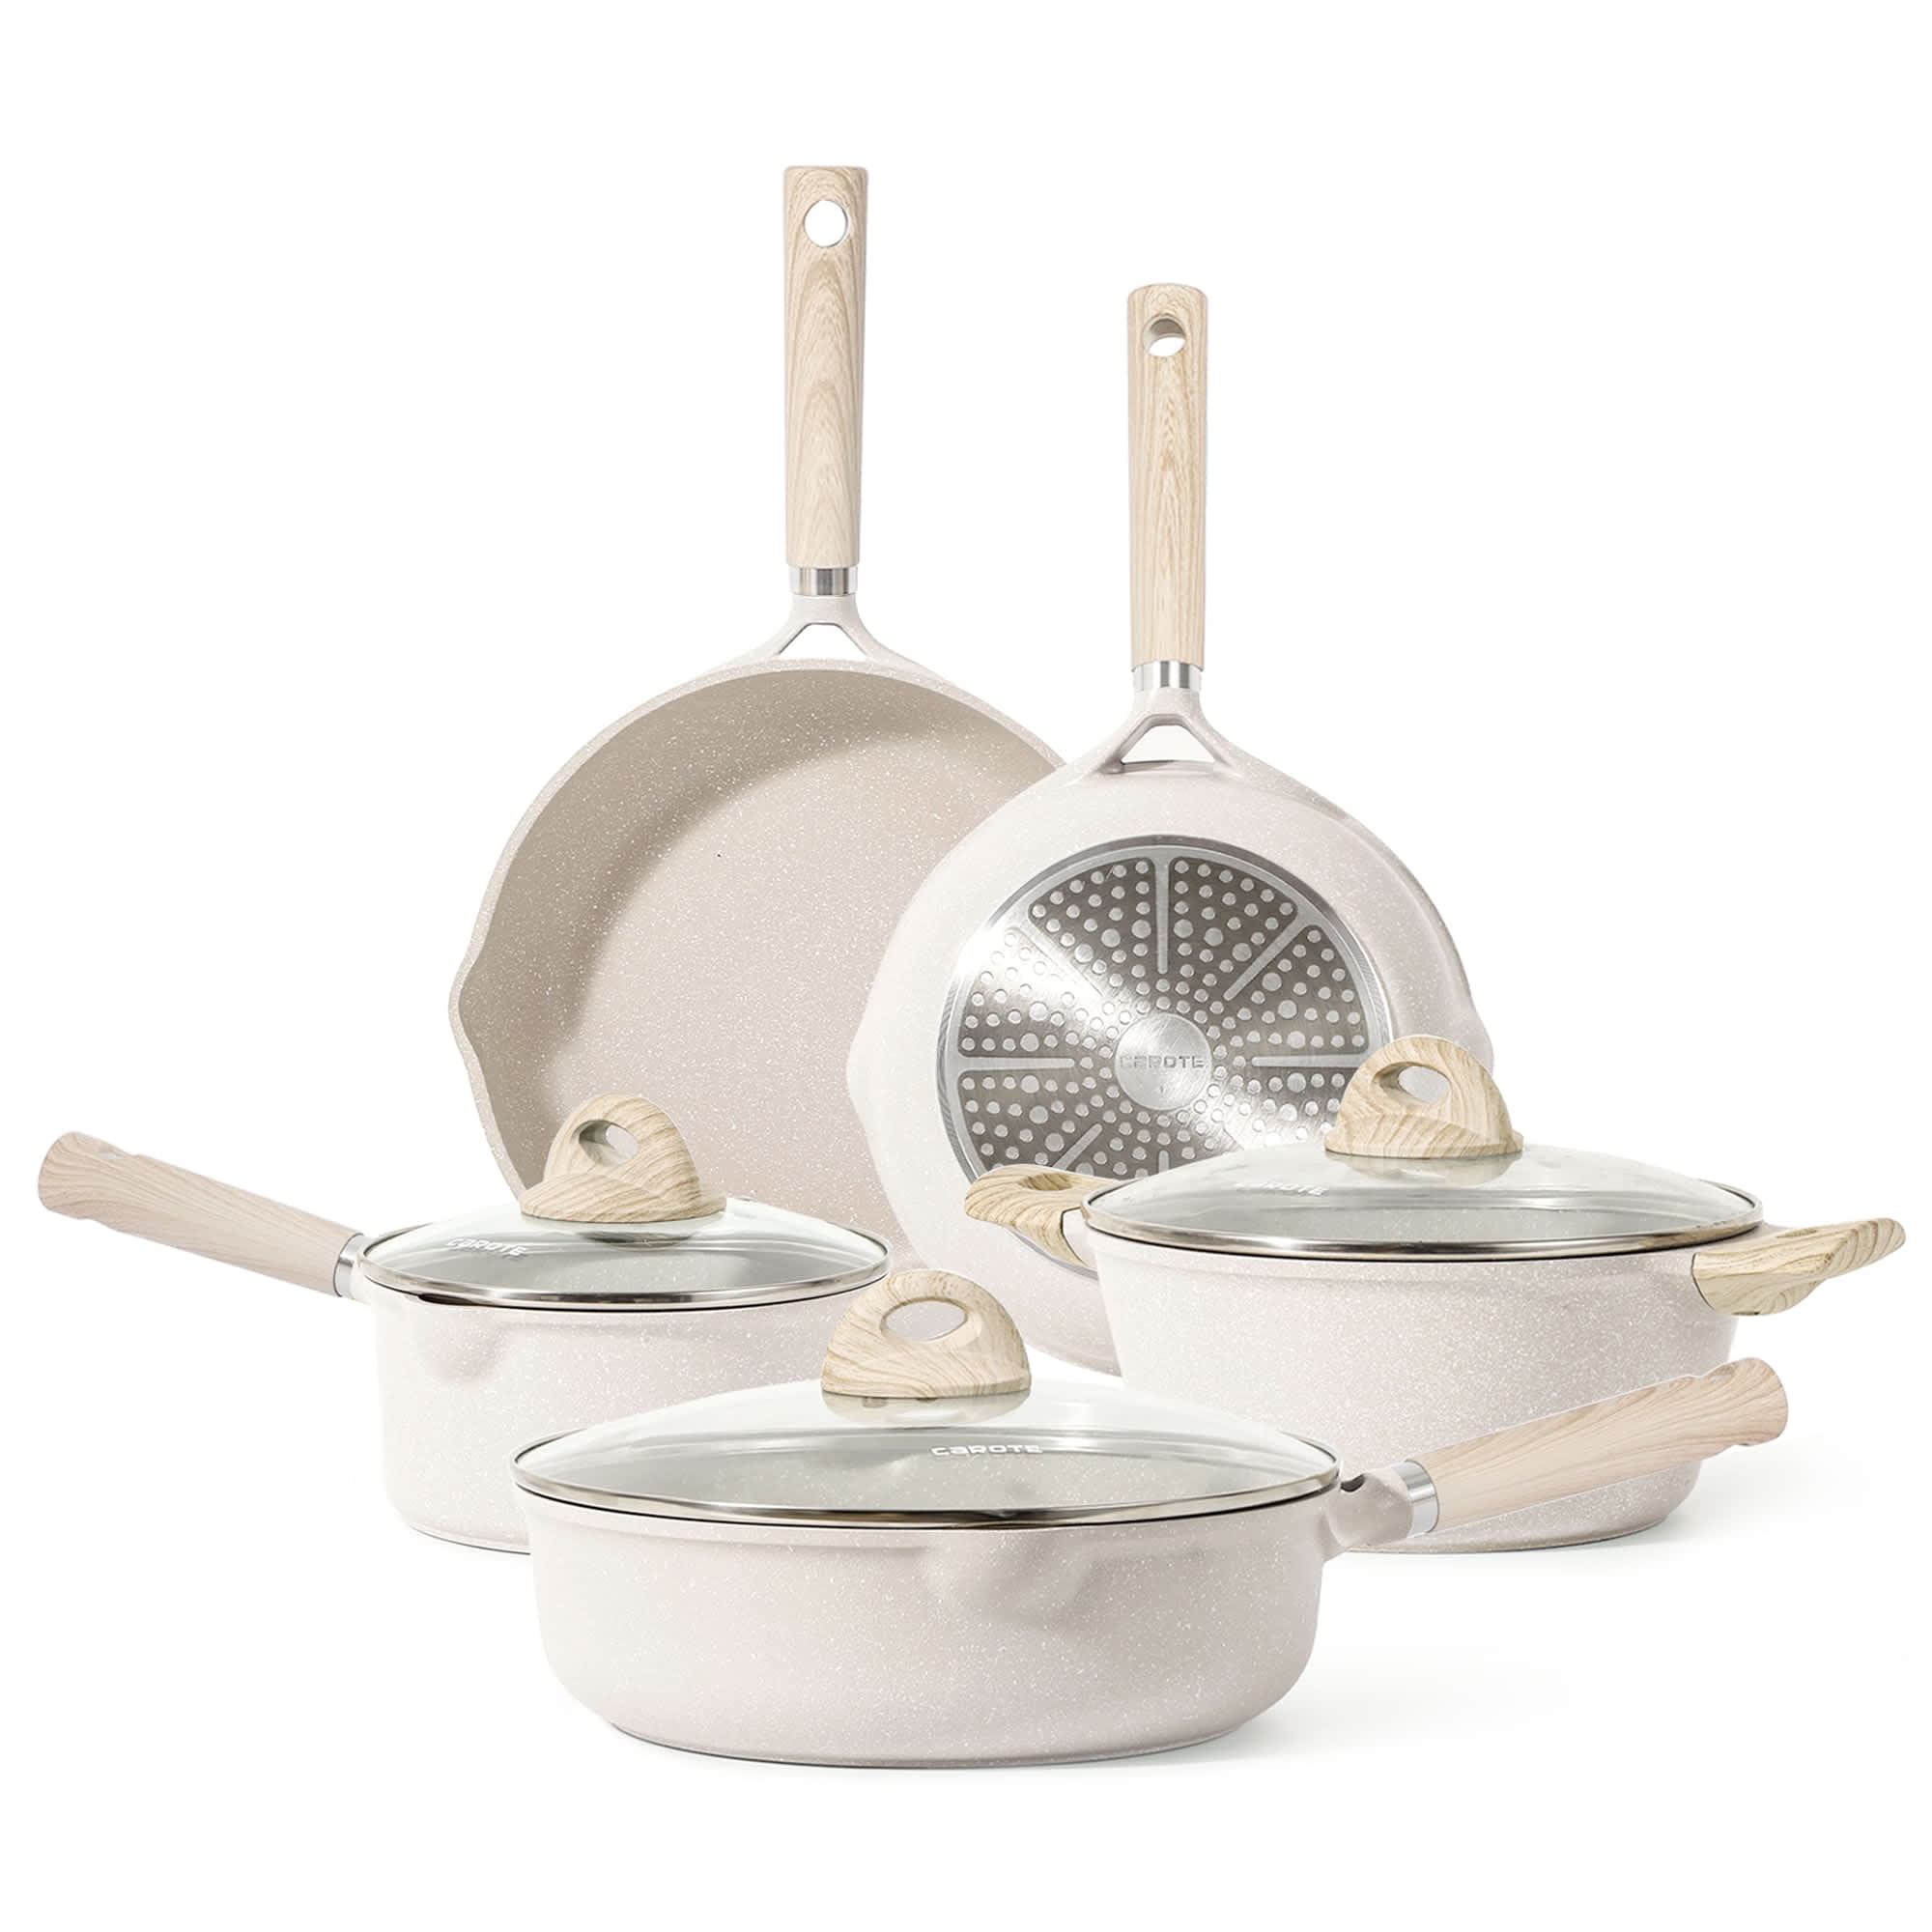 http://cdn.apartmenttherapy.info/image/upload/v1698695640/at/archive/Carote-Nonstick-Pots-and-Pans-Set-8-Pcs-Induction-Kitchen-Cookware-Sets-Beige-Granite_e9d3217f-cb9e-4b2e-b6ed-9257746d0db1.jpg